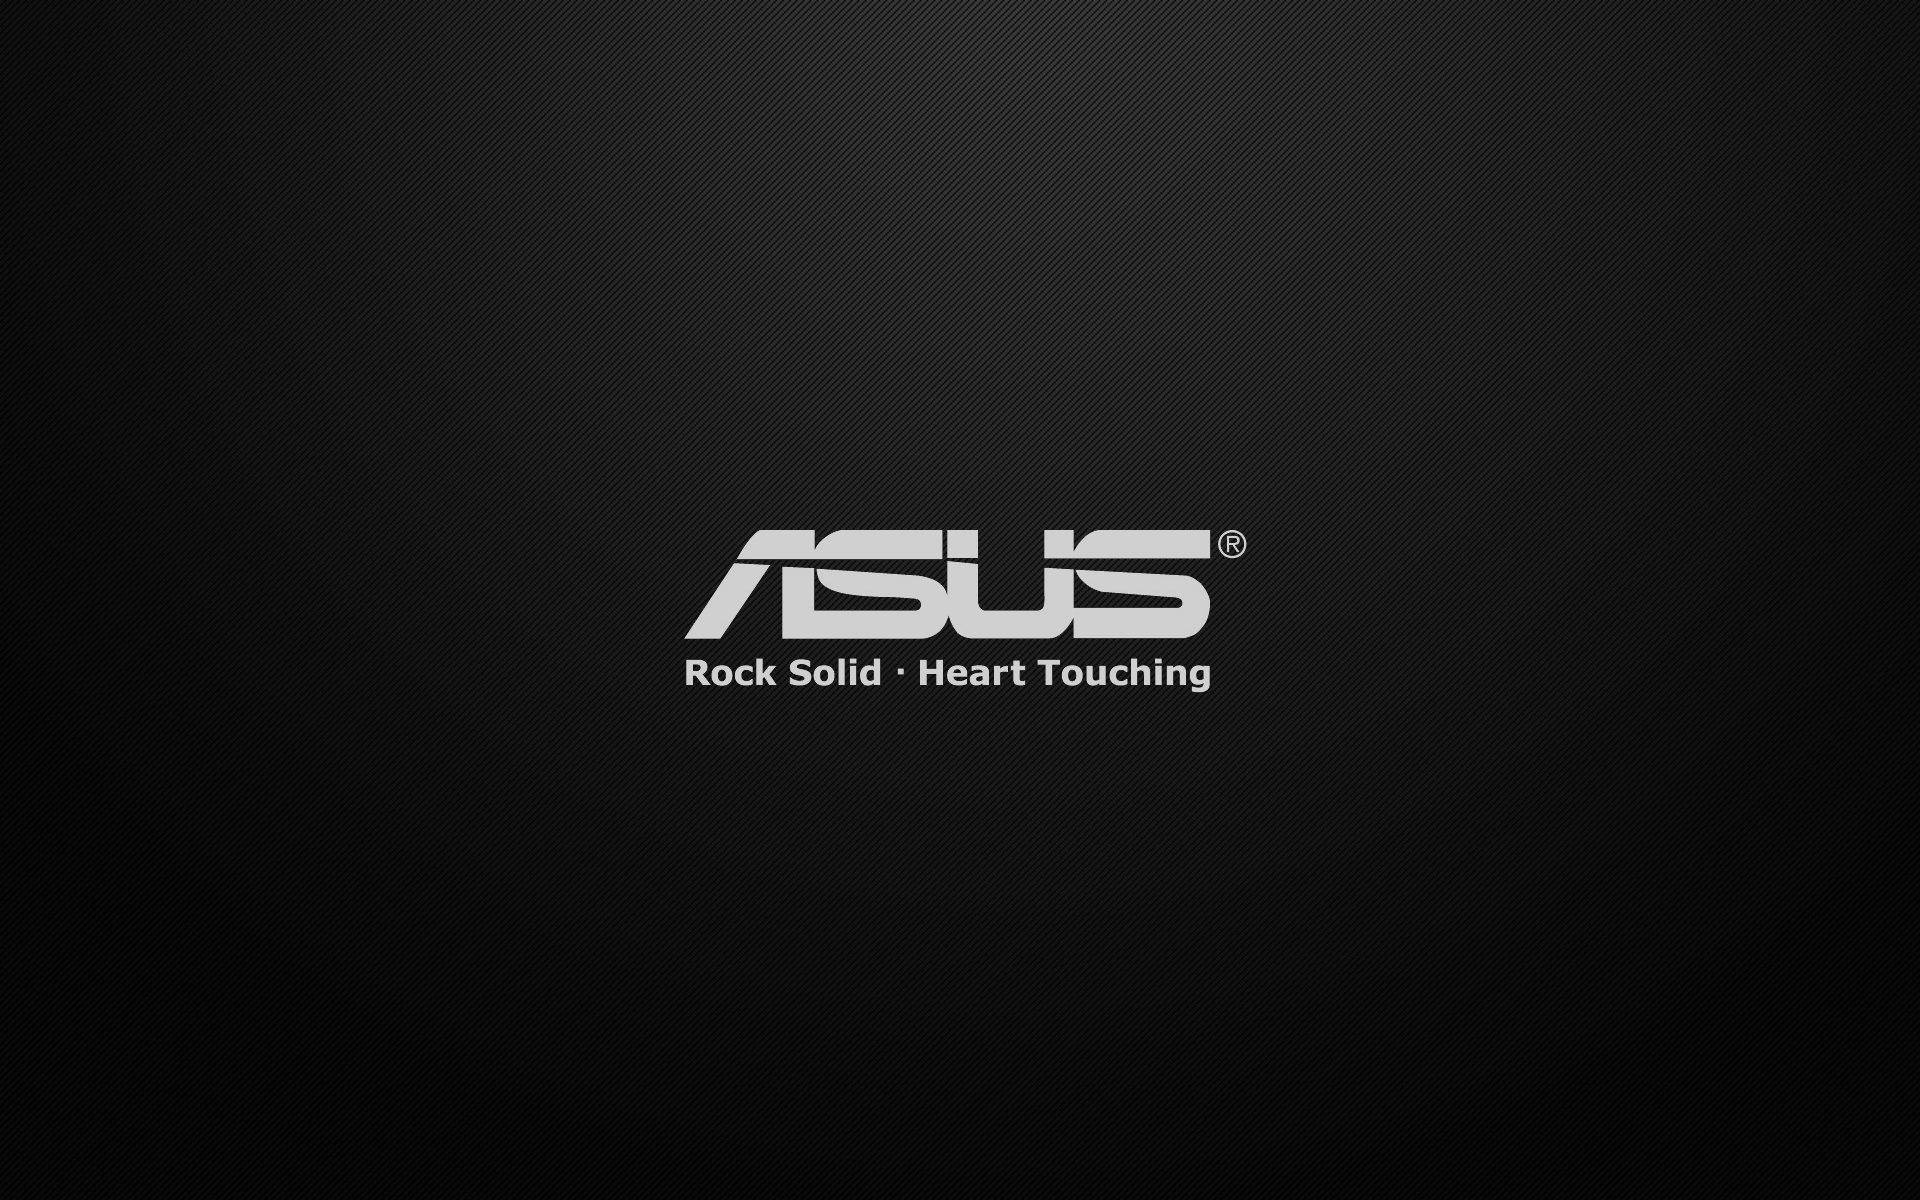 Asus Text Logo Hd Picture